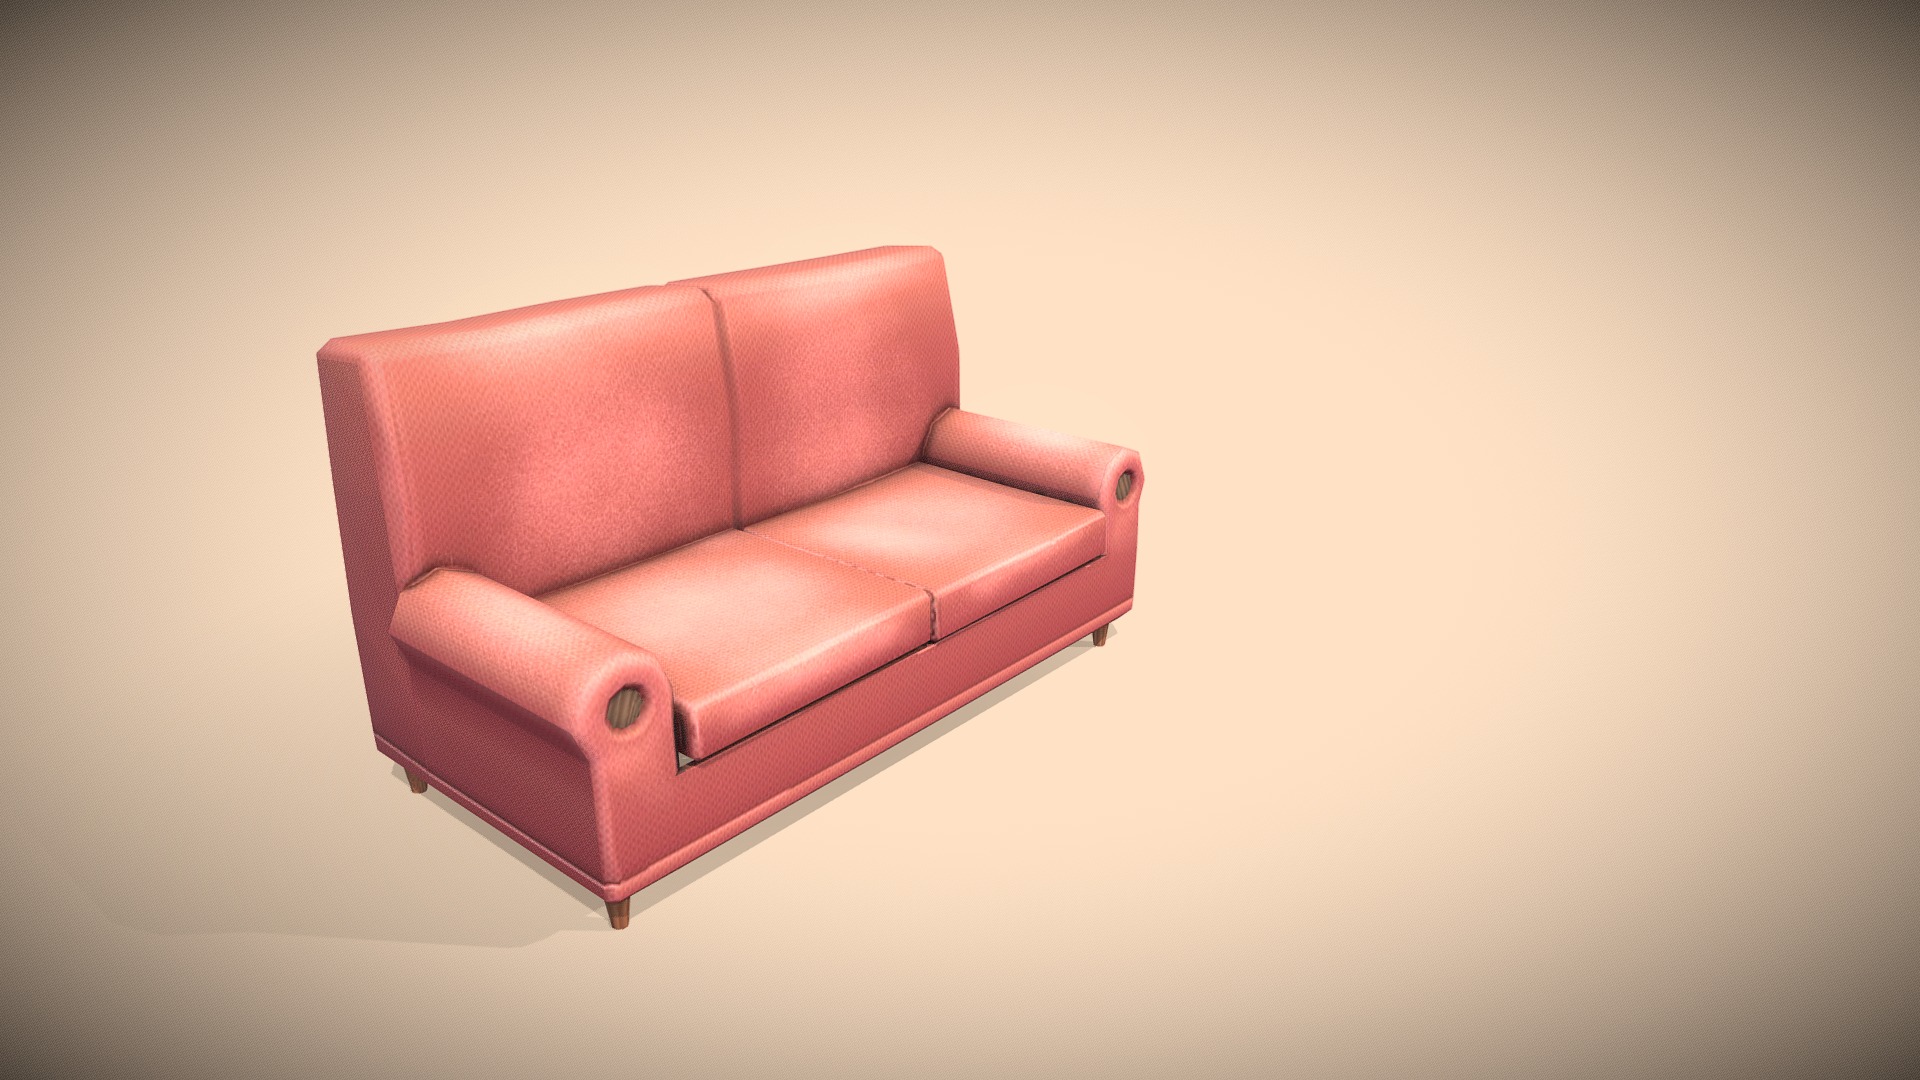 3D model game ready Couch low poly - This is a 3D model of the game ready Couch low poly. The 3D model is about a red leather couch.